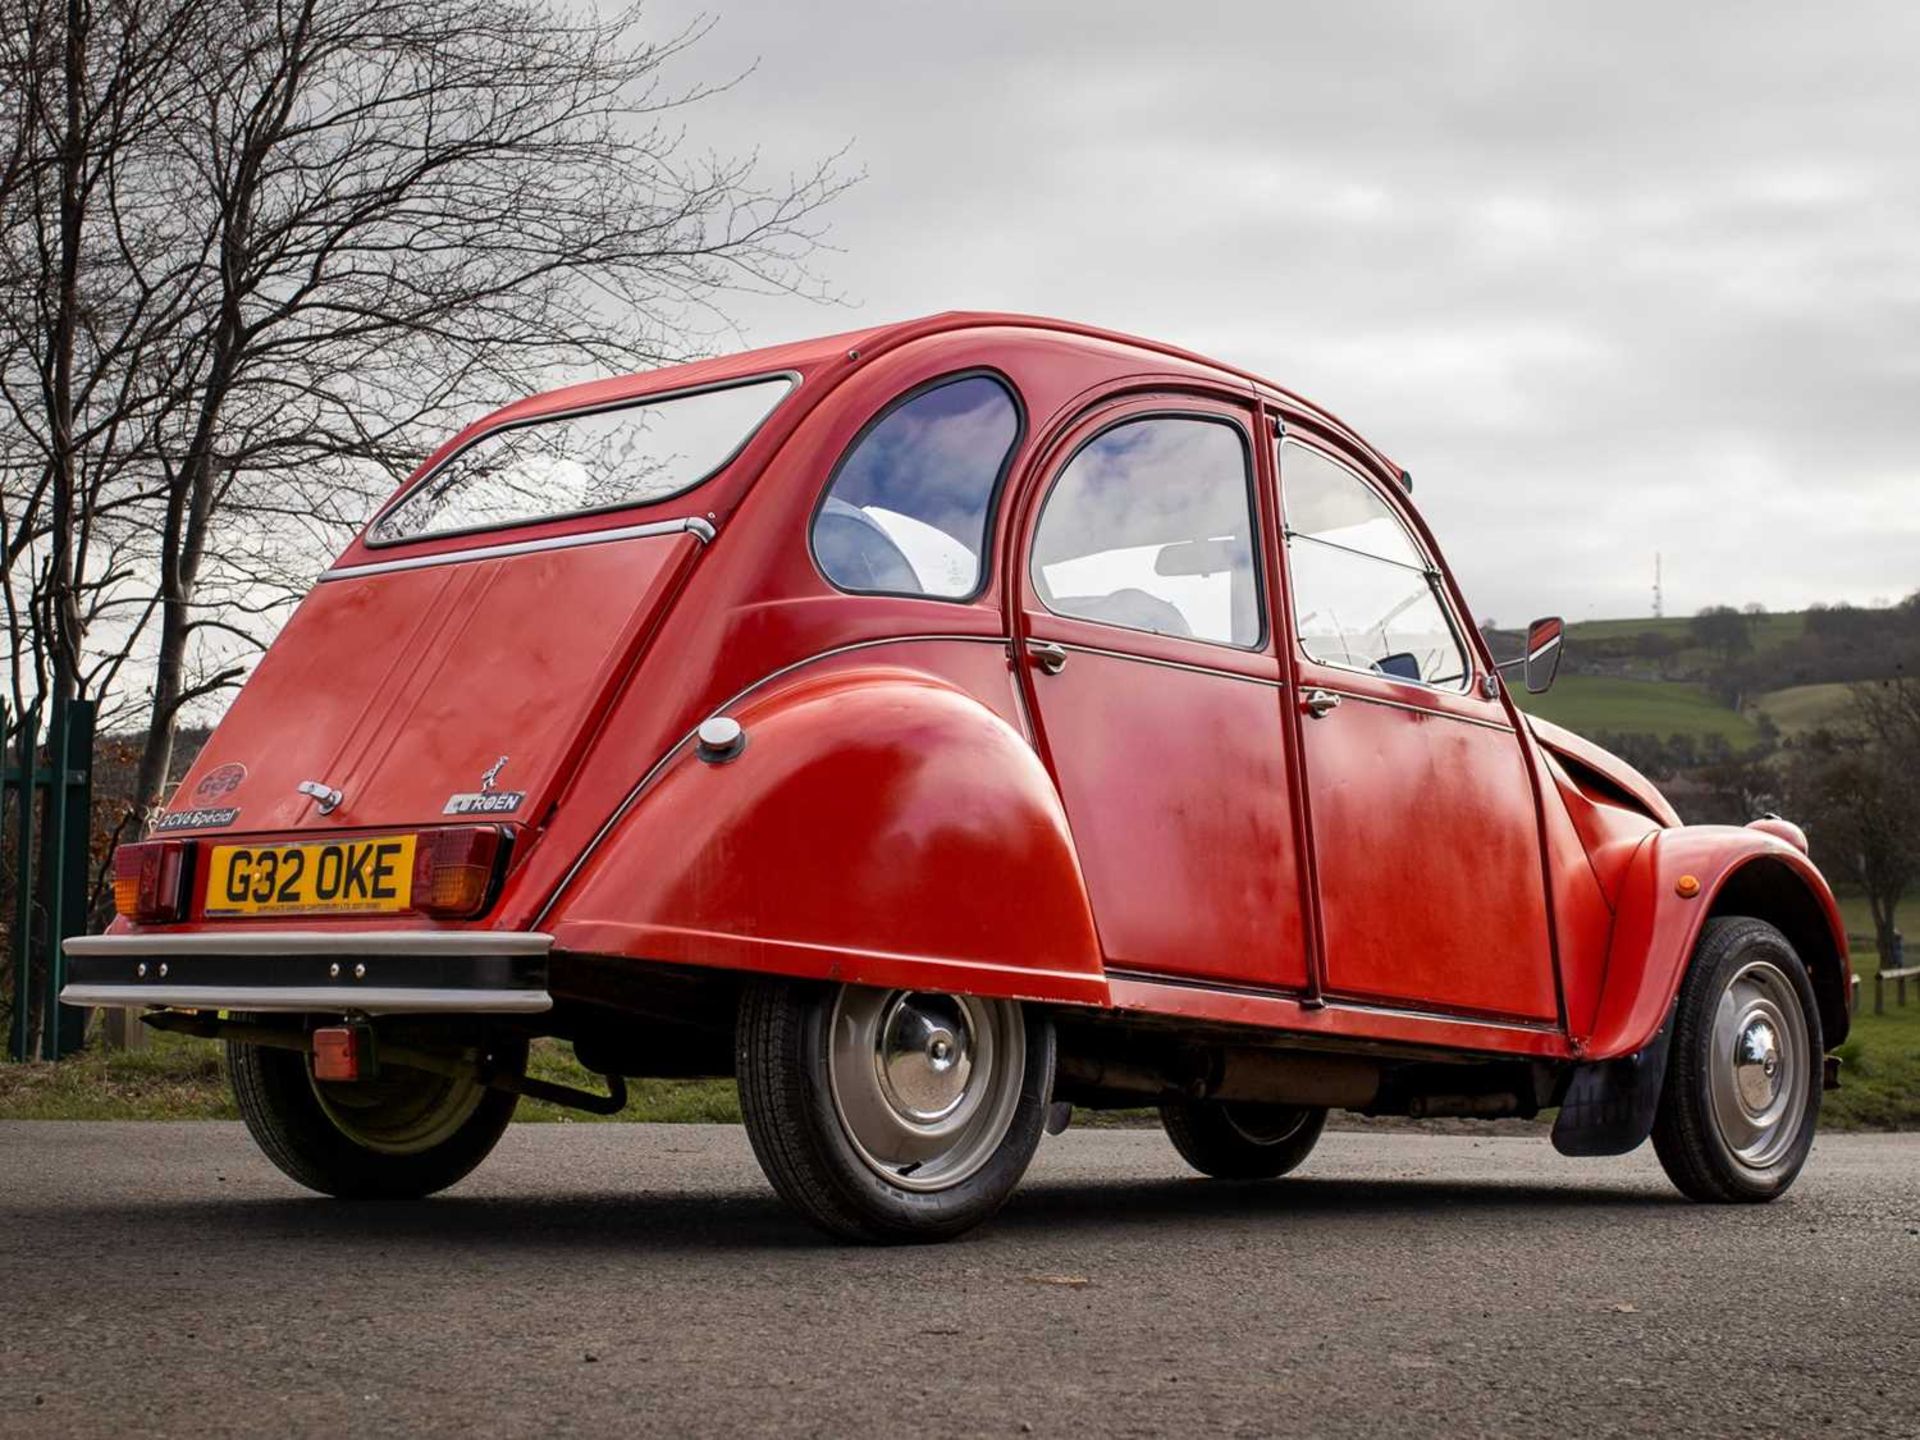 1989 Citroën 2CV6 Spécial Believed to have covered a credible 15,000 miles - Image 17 of 113